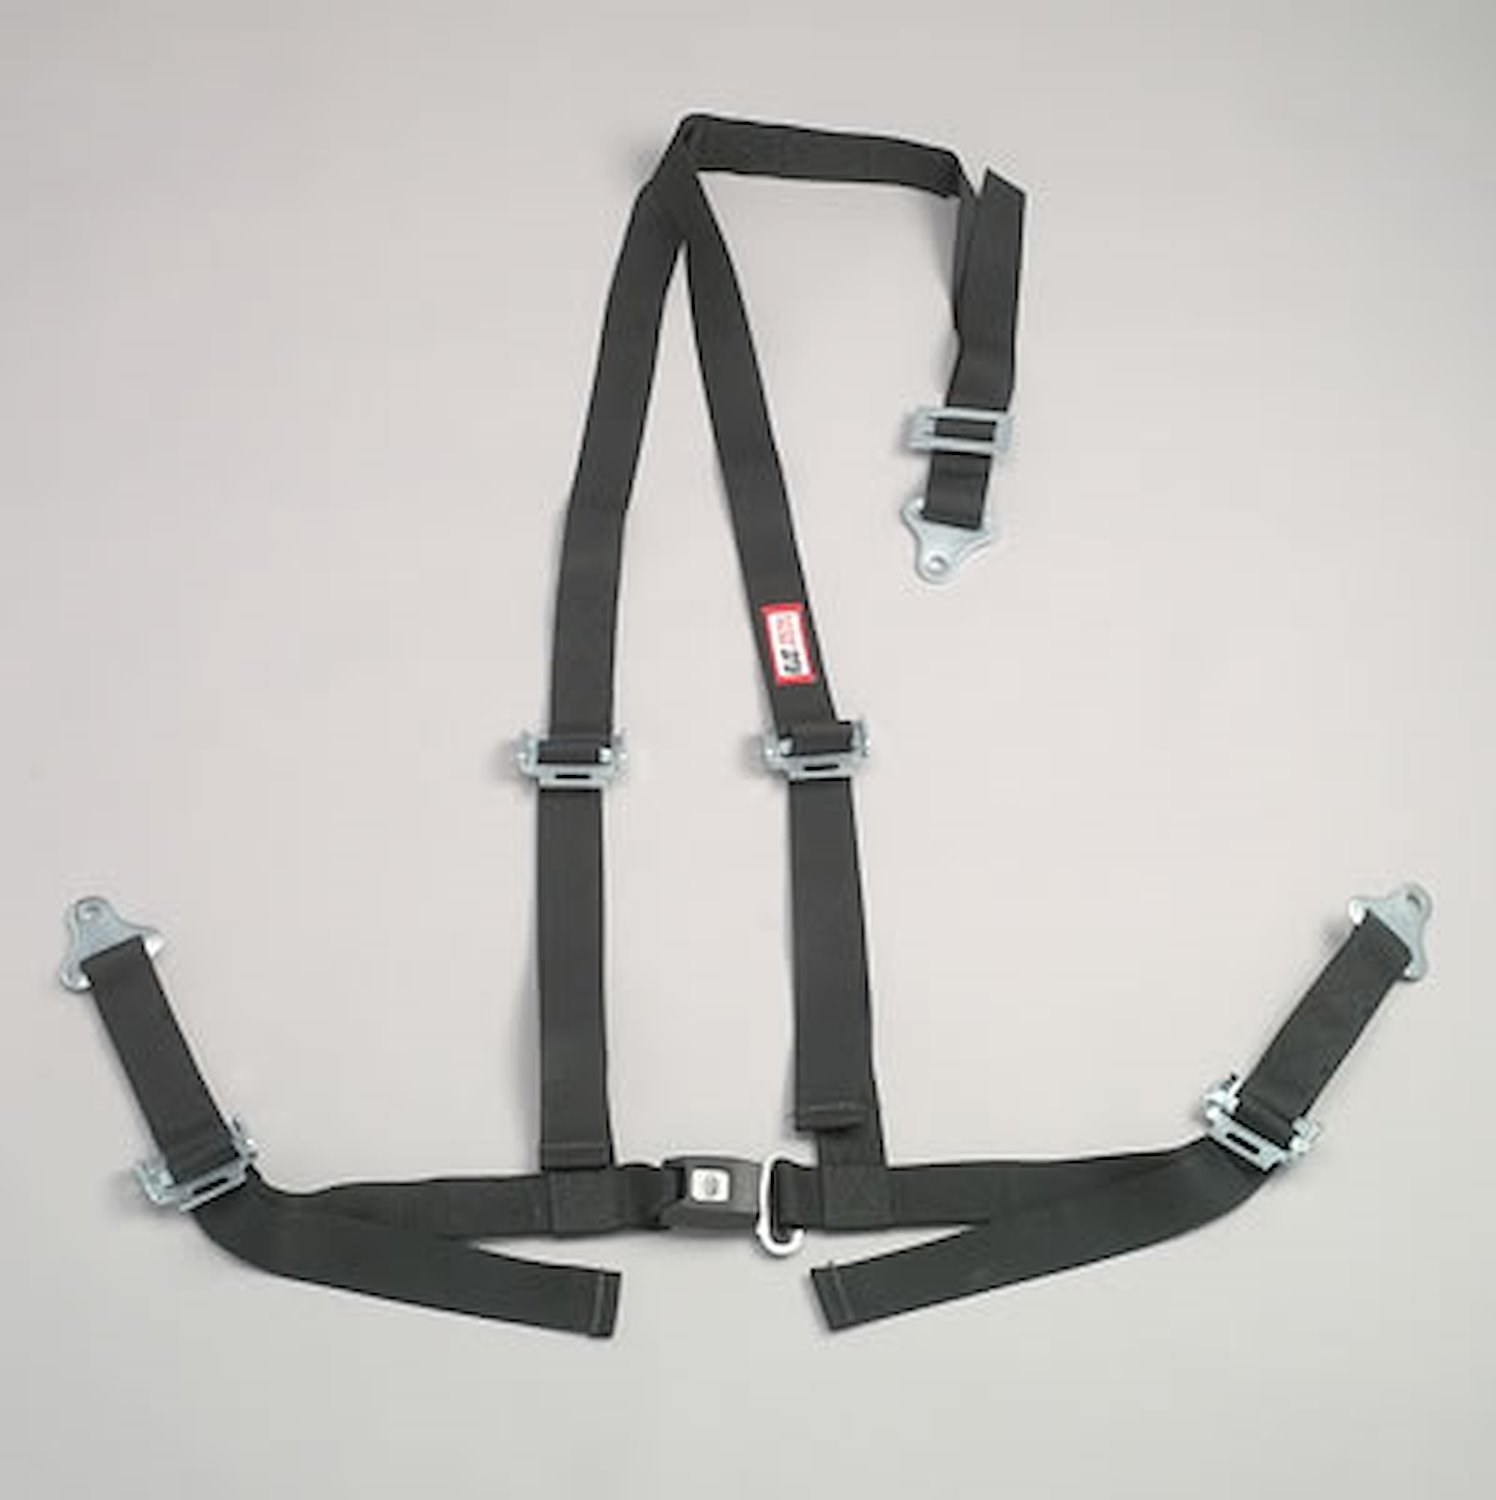 NON-SFI B&T HARNESS 2 PULL UP Lap Belt SNAP 2 S. H. Y FLOOR Mount WRAP/BOLT w/STERNUM STRAP YELLOW